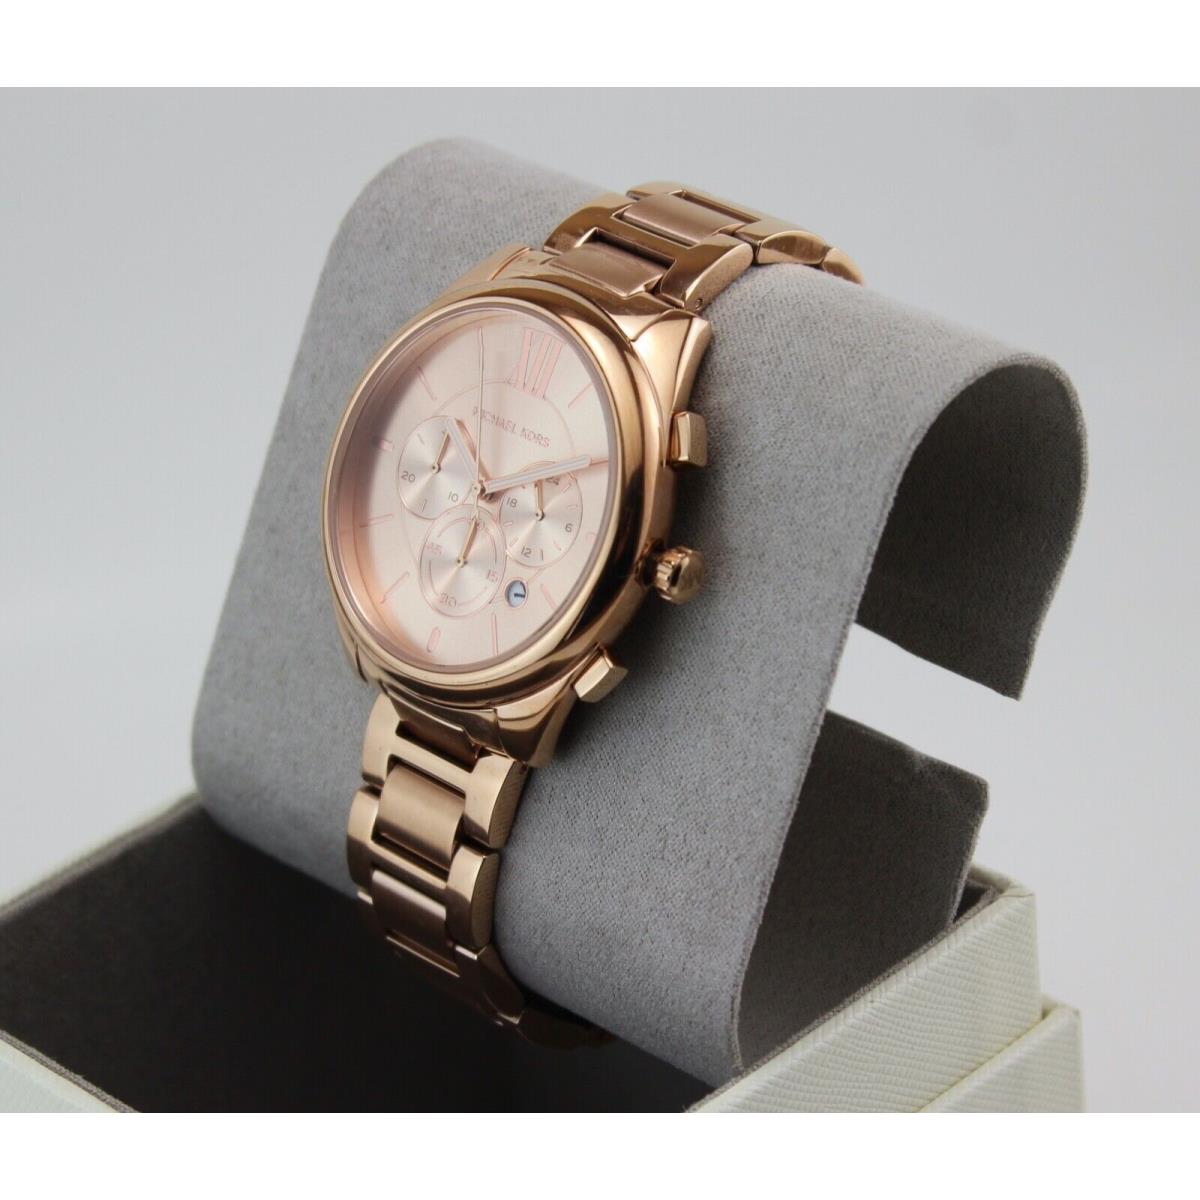 Michael Kors watch Janelle - Rose Gold Dial, Rose Gold Band